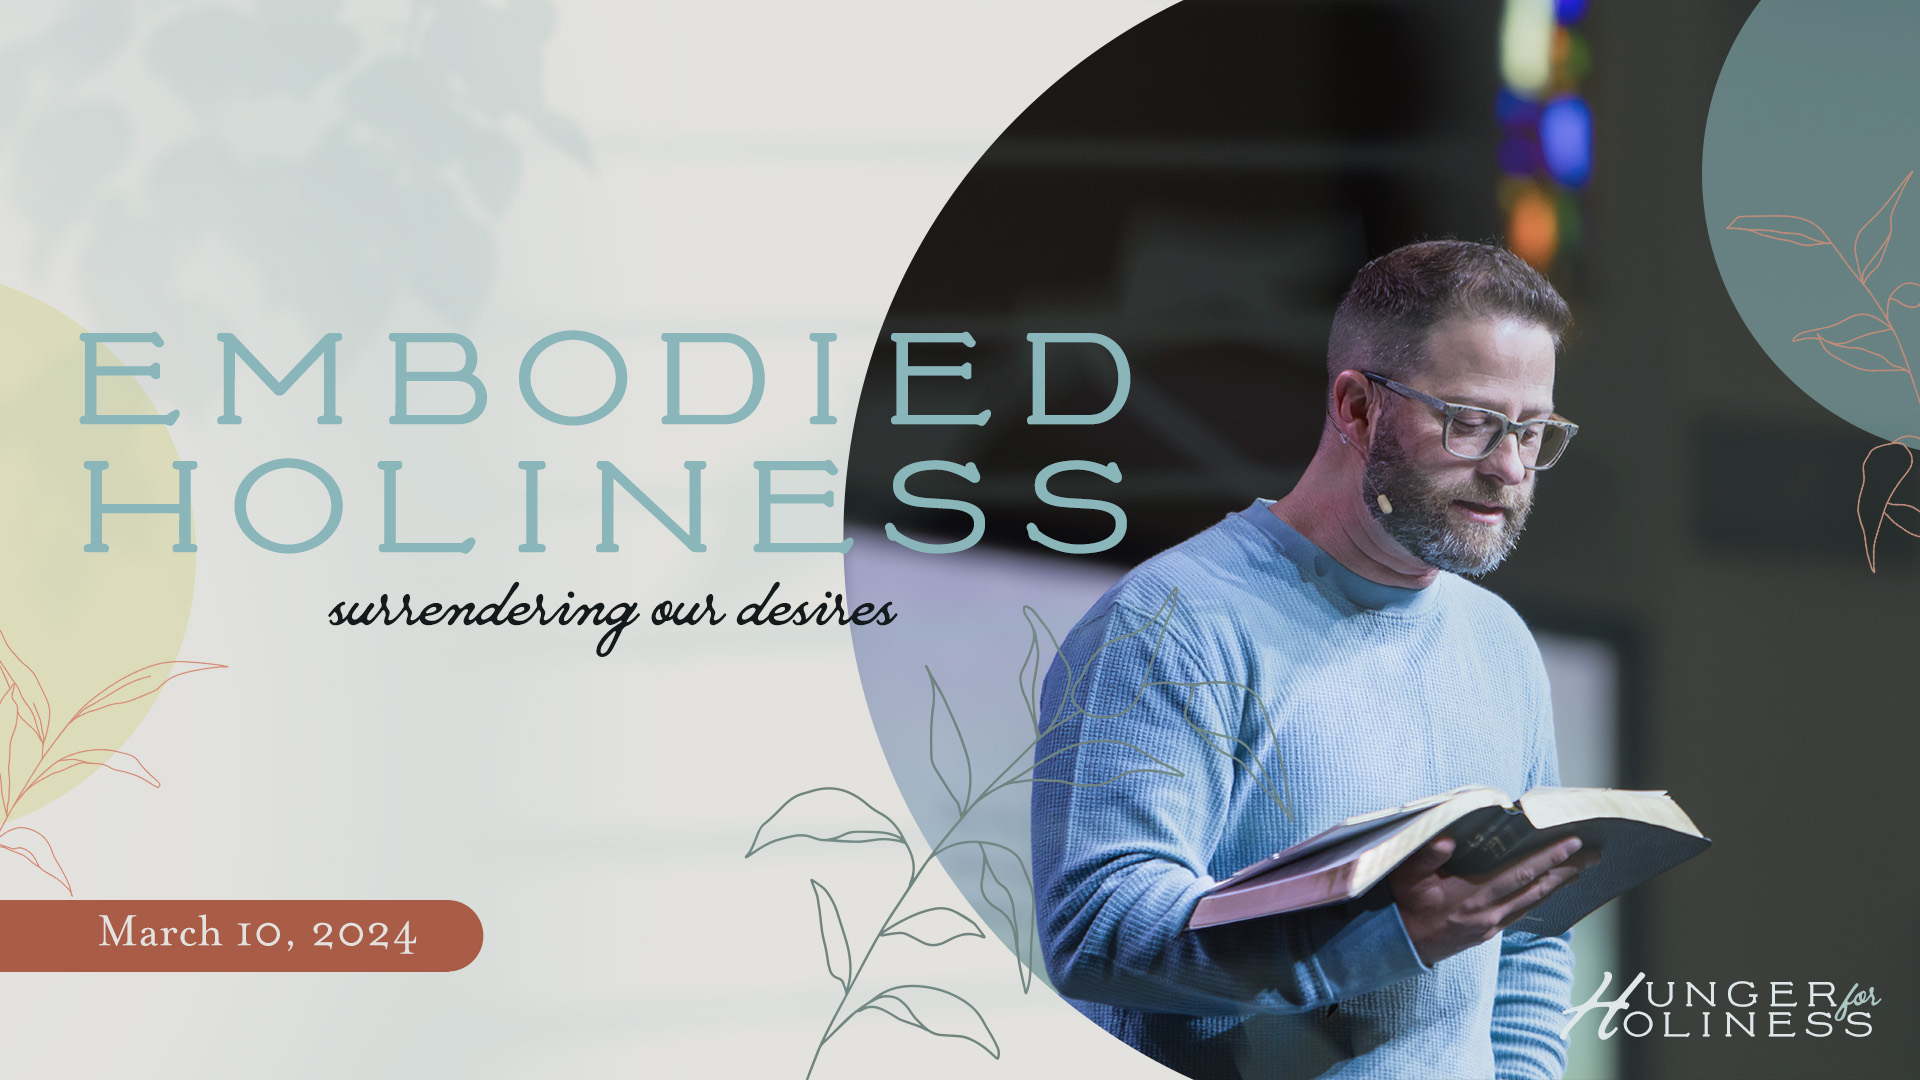 Embodied Holiness- surrendering our desires Image